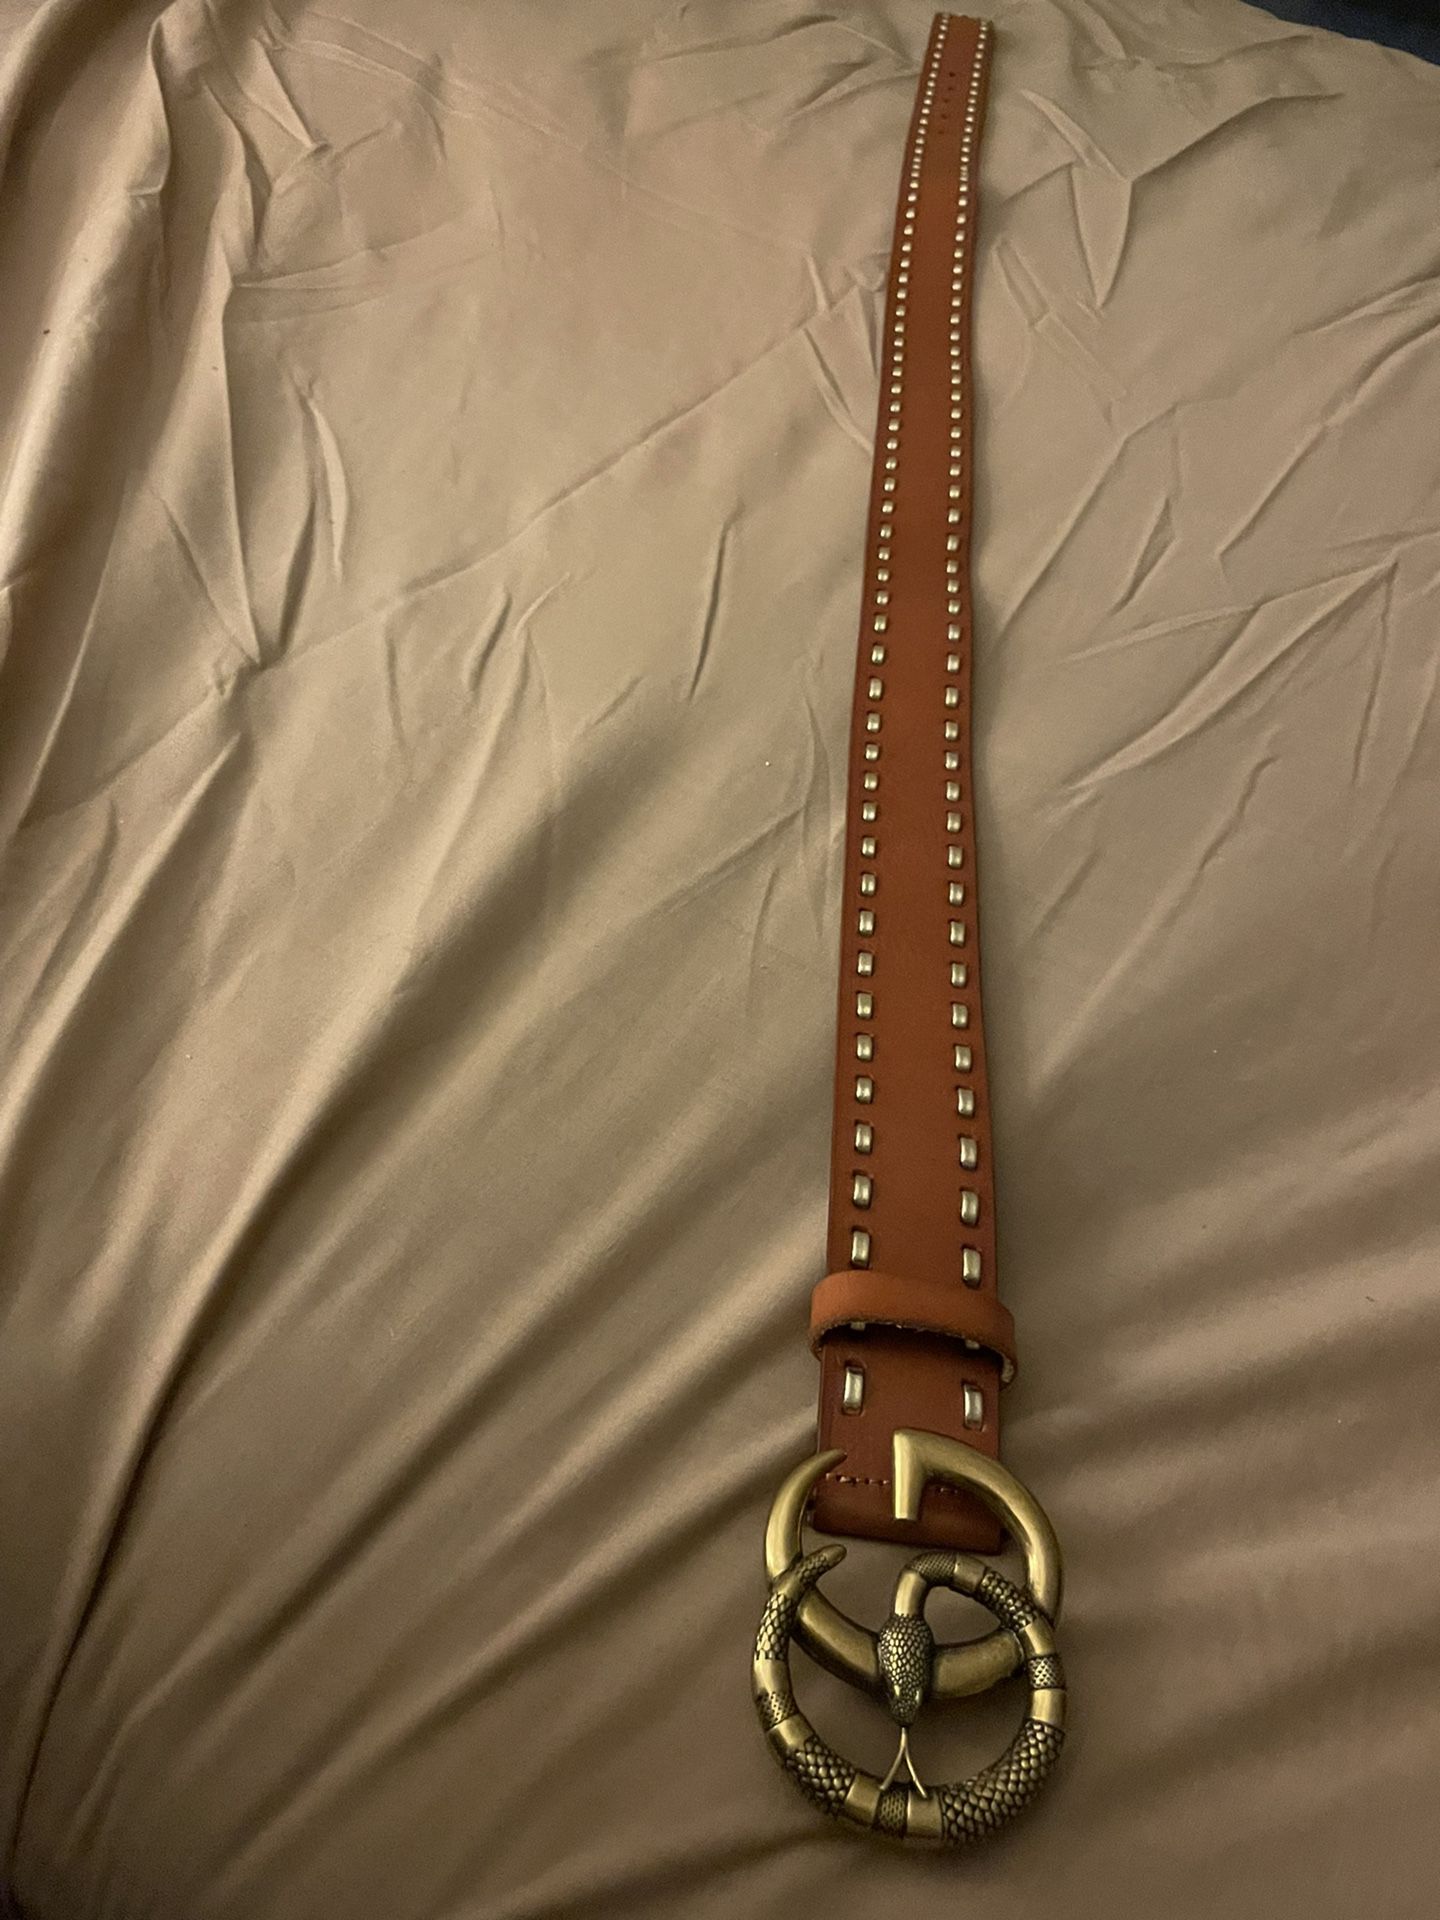 Gucci Belt serial number 1149844801999538 for Sale in Philadelphia, PA -  OfferUp